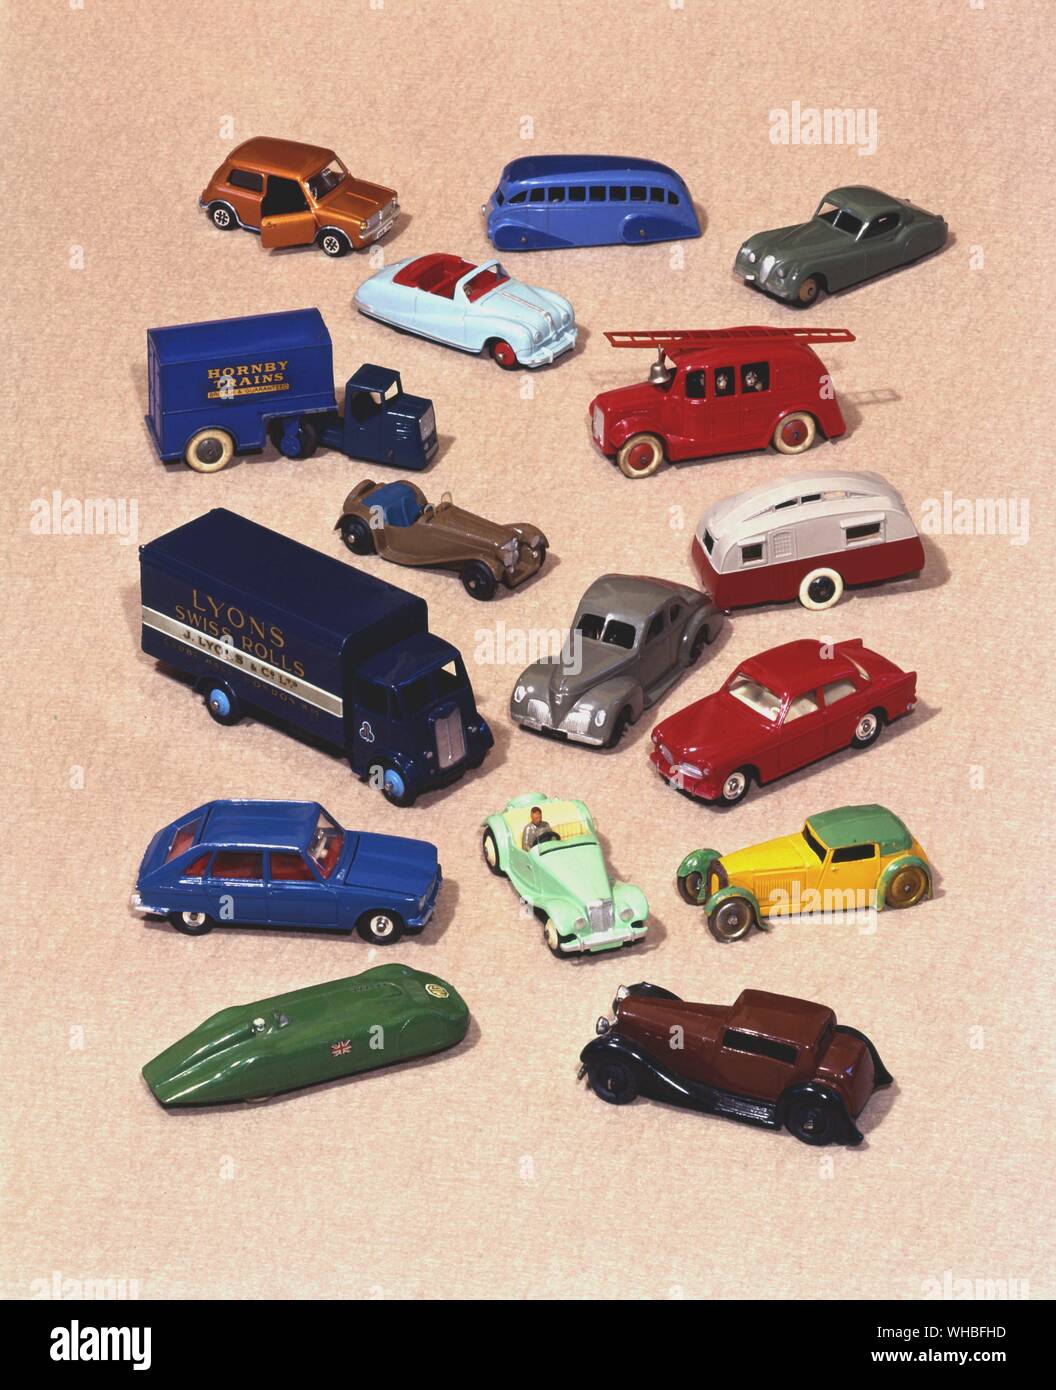 Dinky toys : die-cast miniature model cars and trucks . Mini Clubman 1976 . streamlined coach 1938 . Jaguar XK 120 1954 . Austin A40 Atlantic 1951 . streamlined fire engine with ten firemen 1938 . Hornby box van 1940 . Jaguar SS 100 1946 . Studebaker State Commender coupe 1946 . towing a caravan 1938 . Lyons Guy delivery van 1952 . Volvo 122S 1962 . Renault R16 1970 . MG TF 1957 . Sports coupe 1933 . MG record car 1940 . Humber Vogue 1946 . Stock Photo